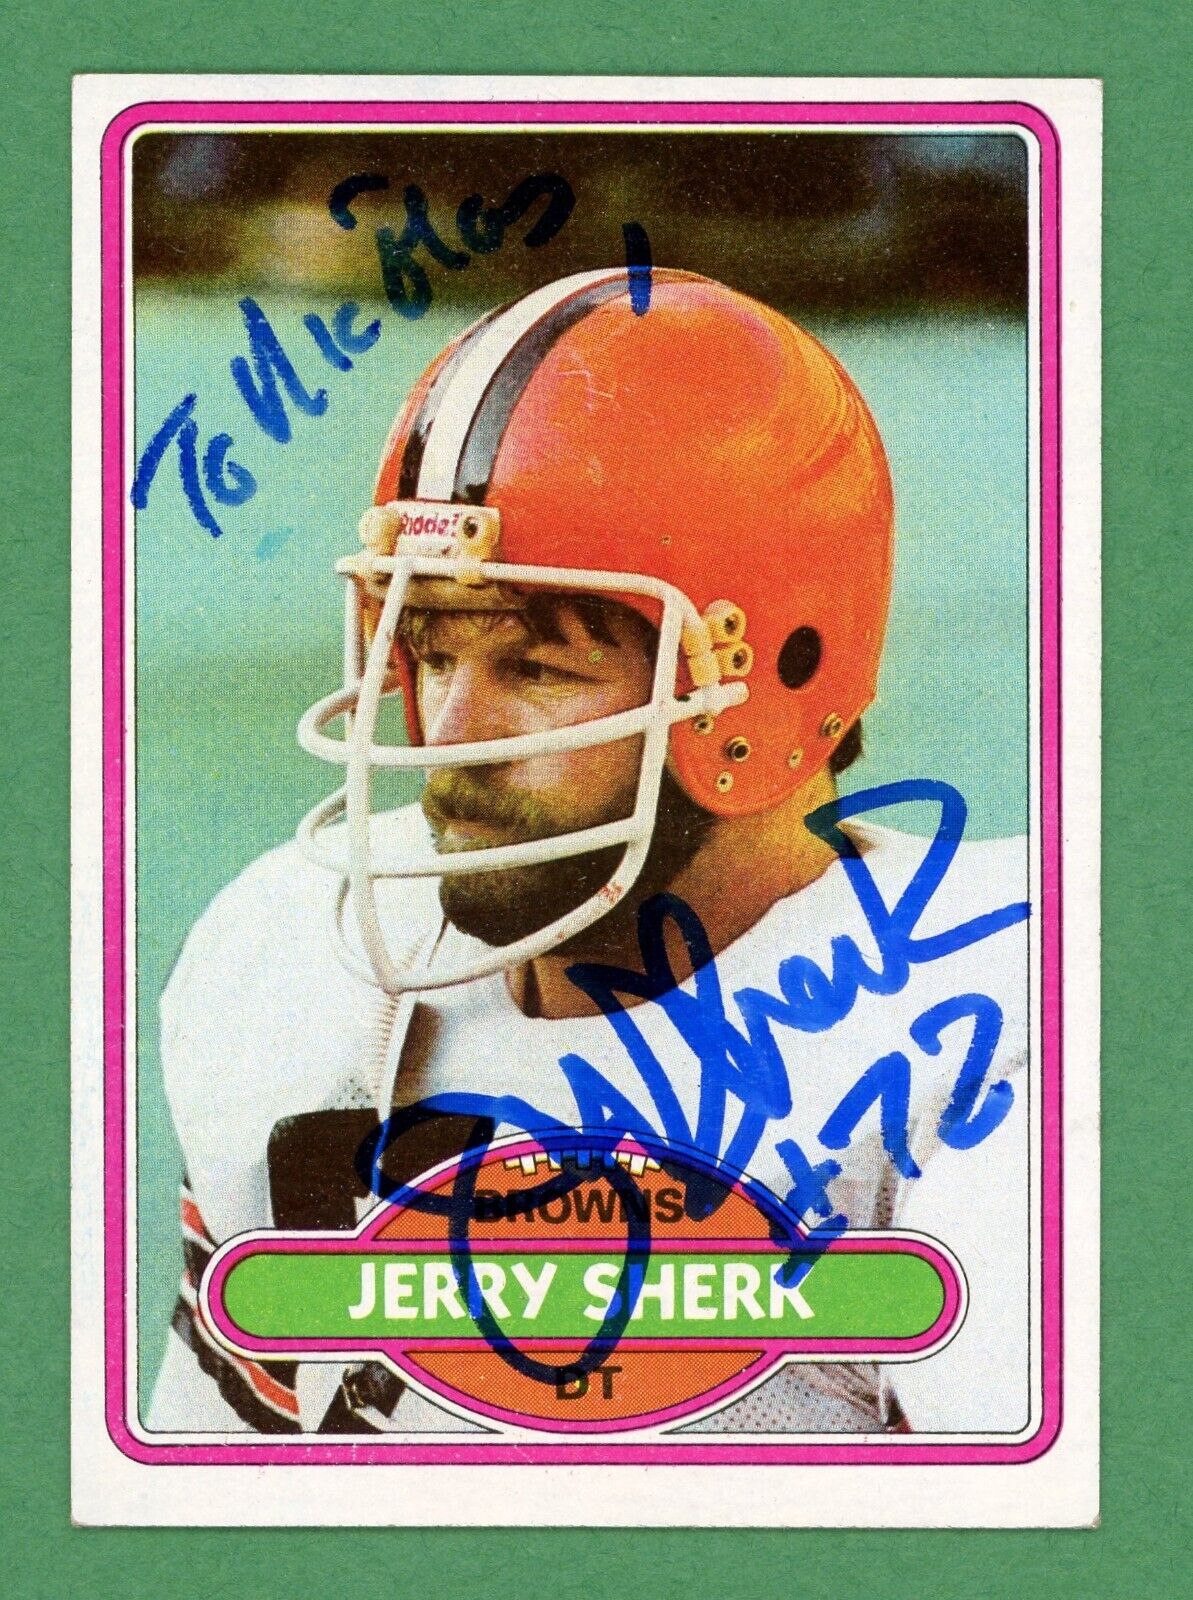 Jerry Sherk NFL Football Signed Trading Card X8159